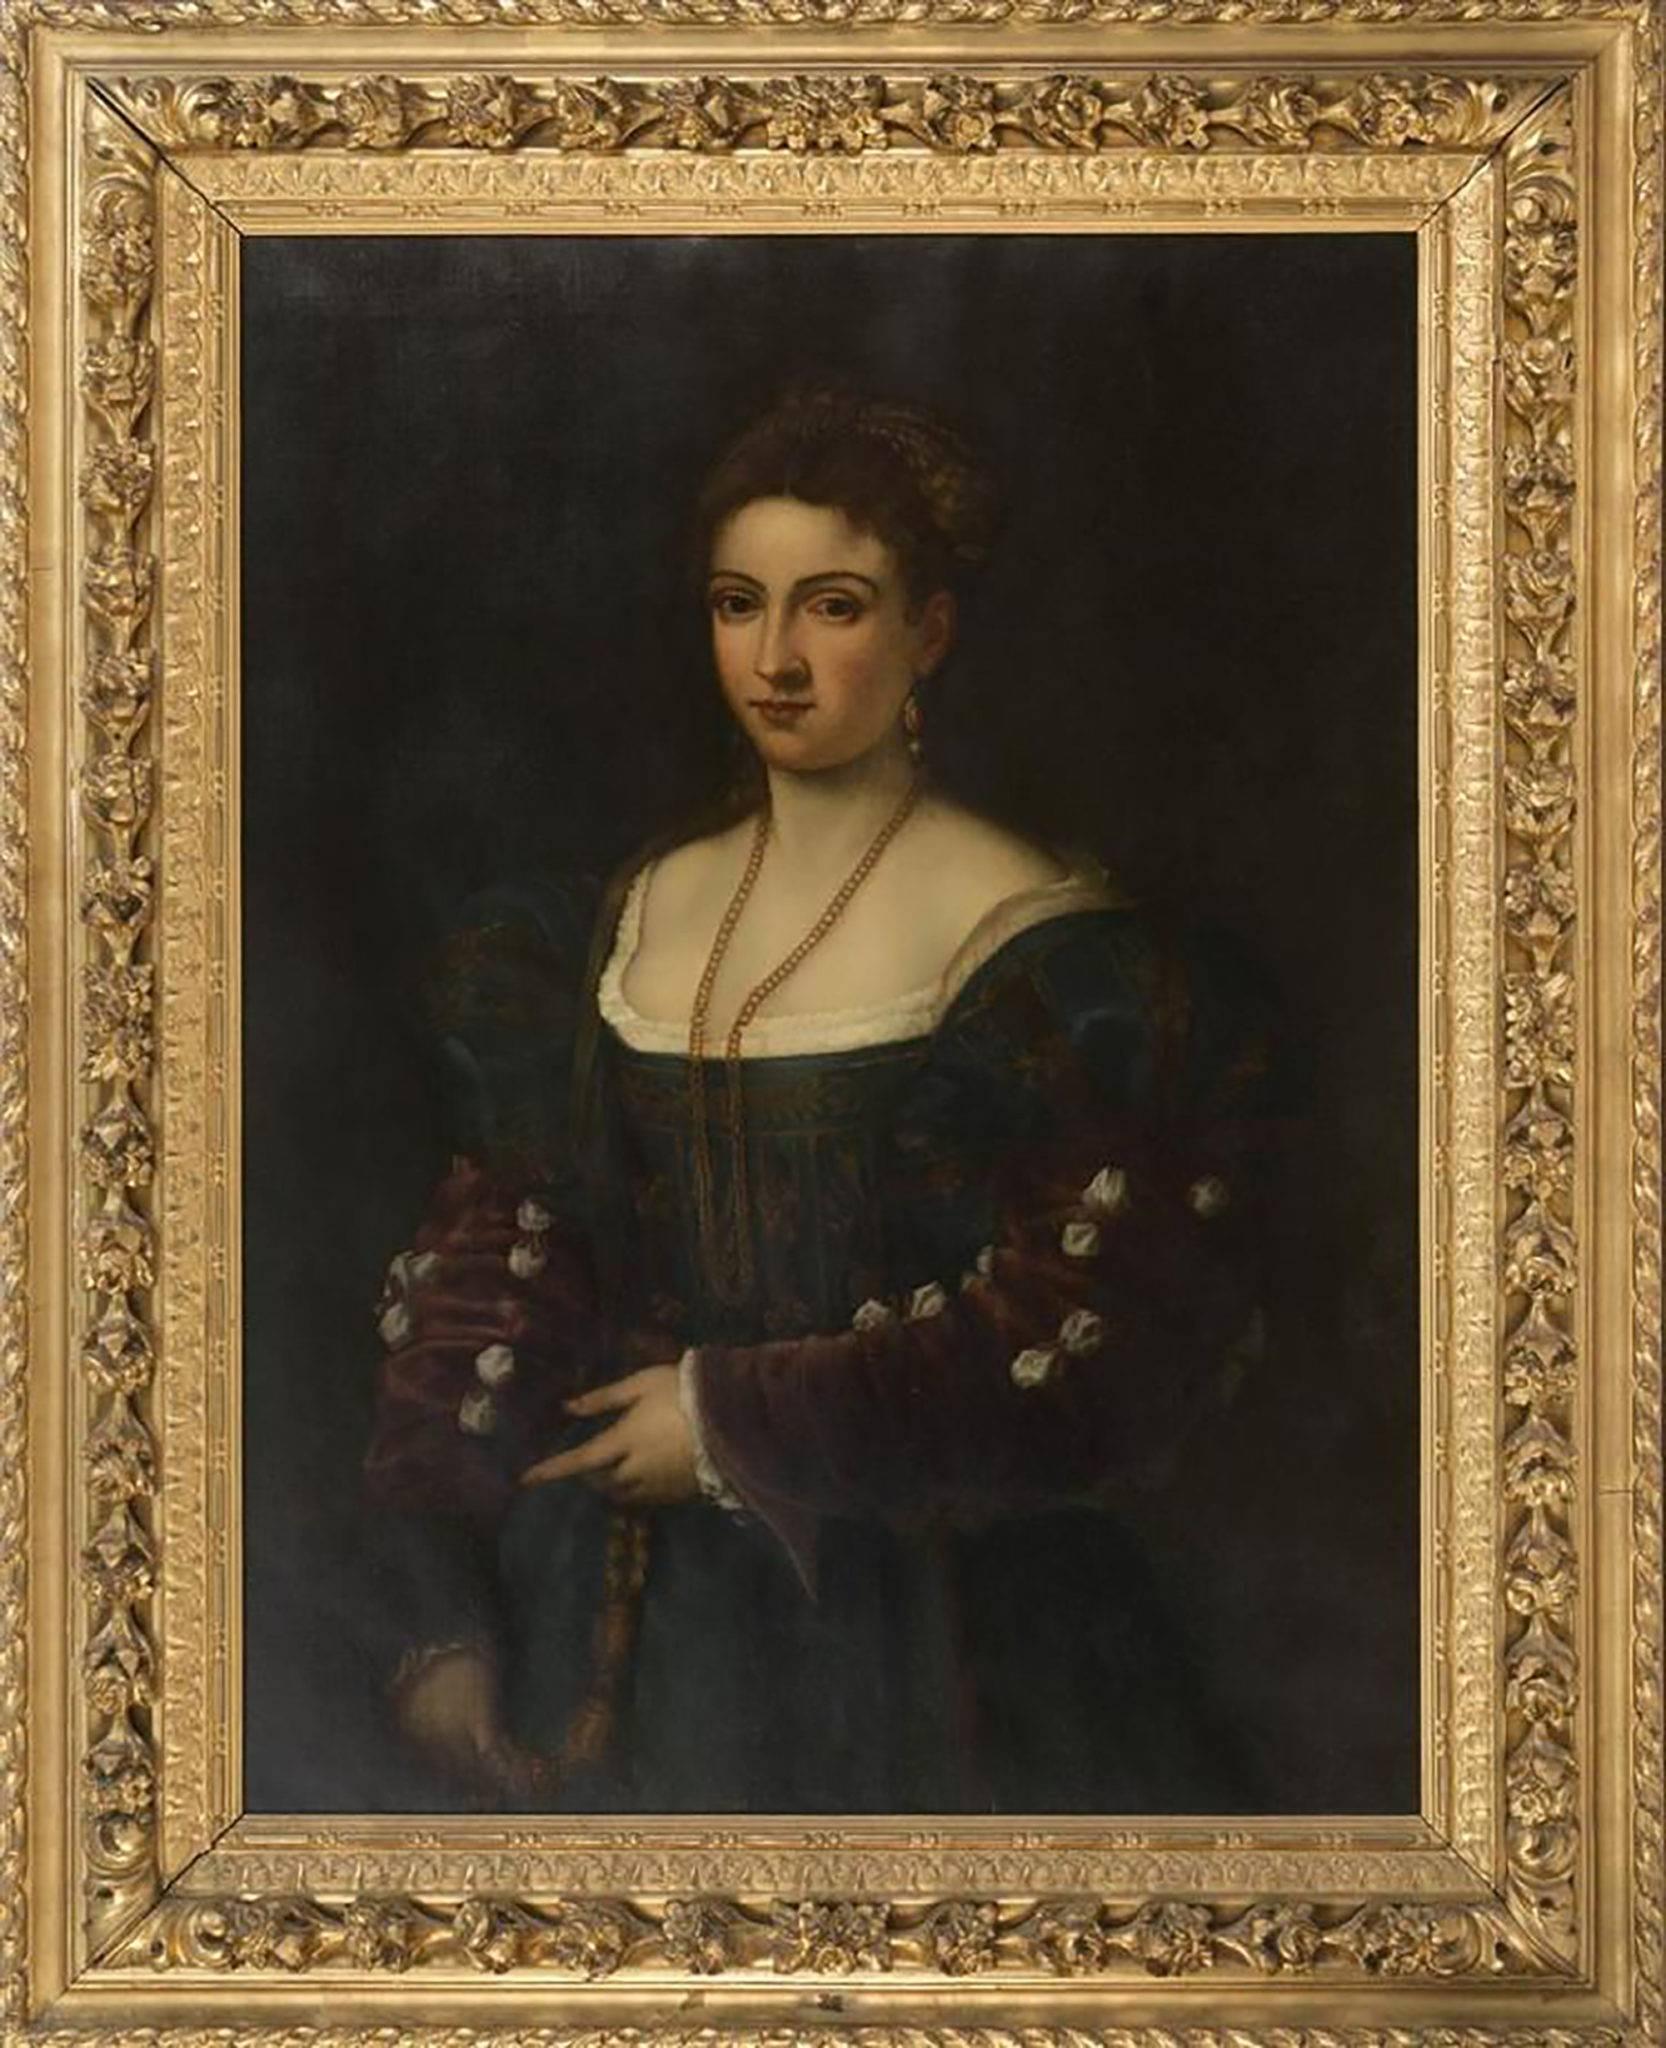 Unknown Portrait Painting - 19th Century Continental School Oil Painting After Titian Entitled “La Bella”